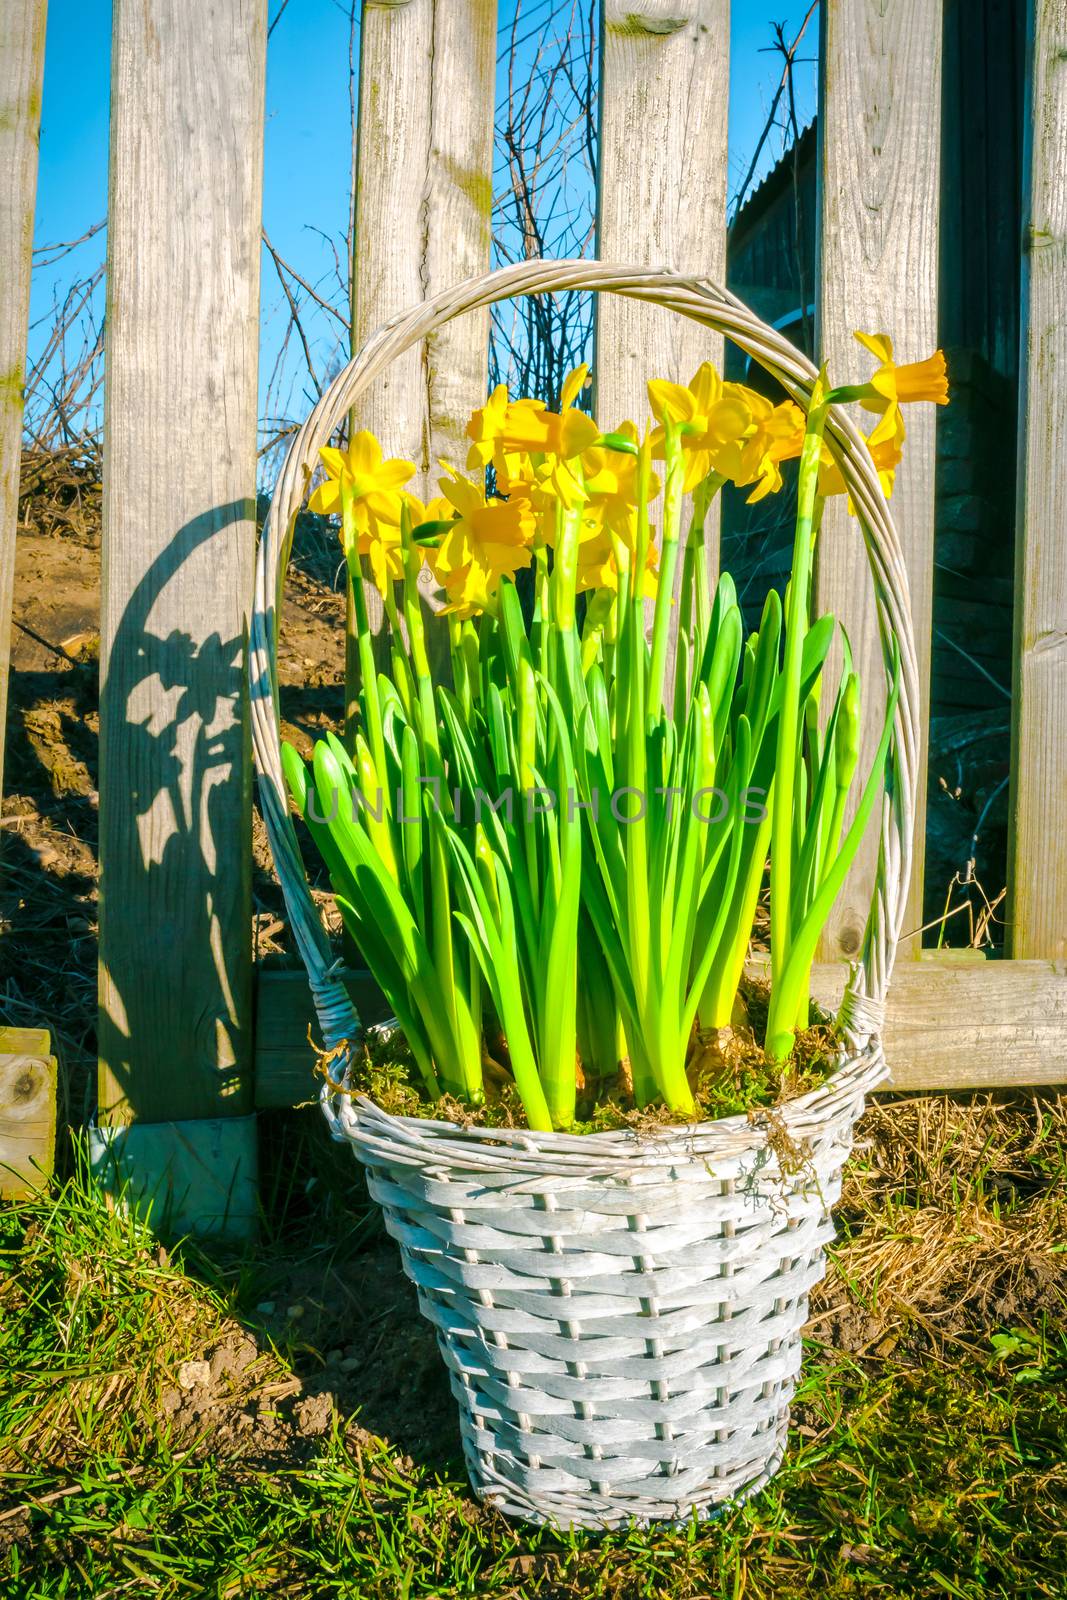 Basket with daffodils in the garden by Sportactive